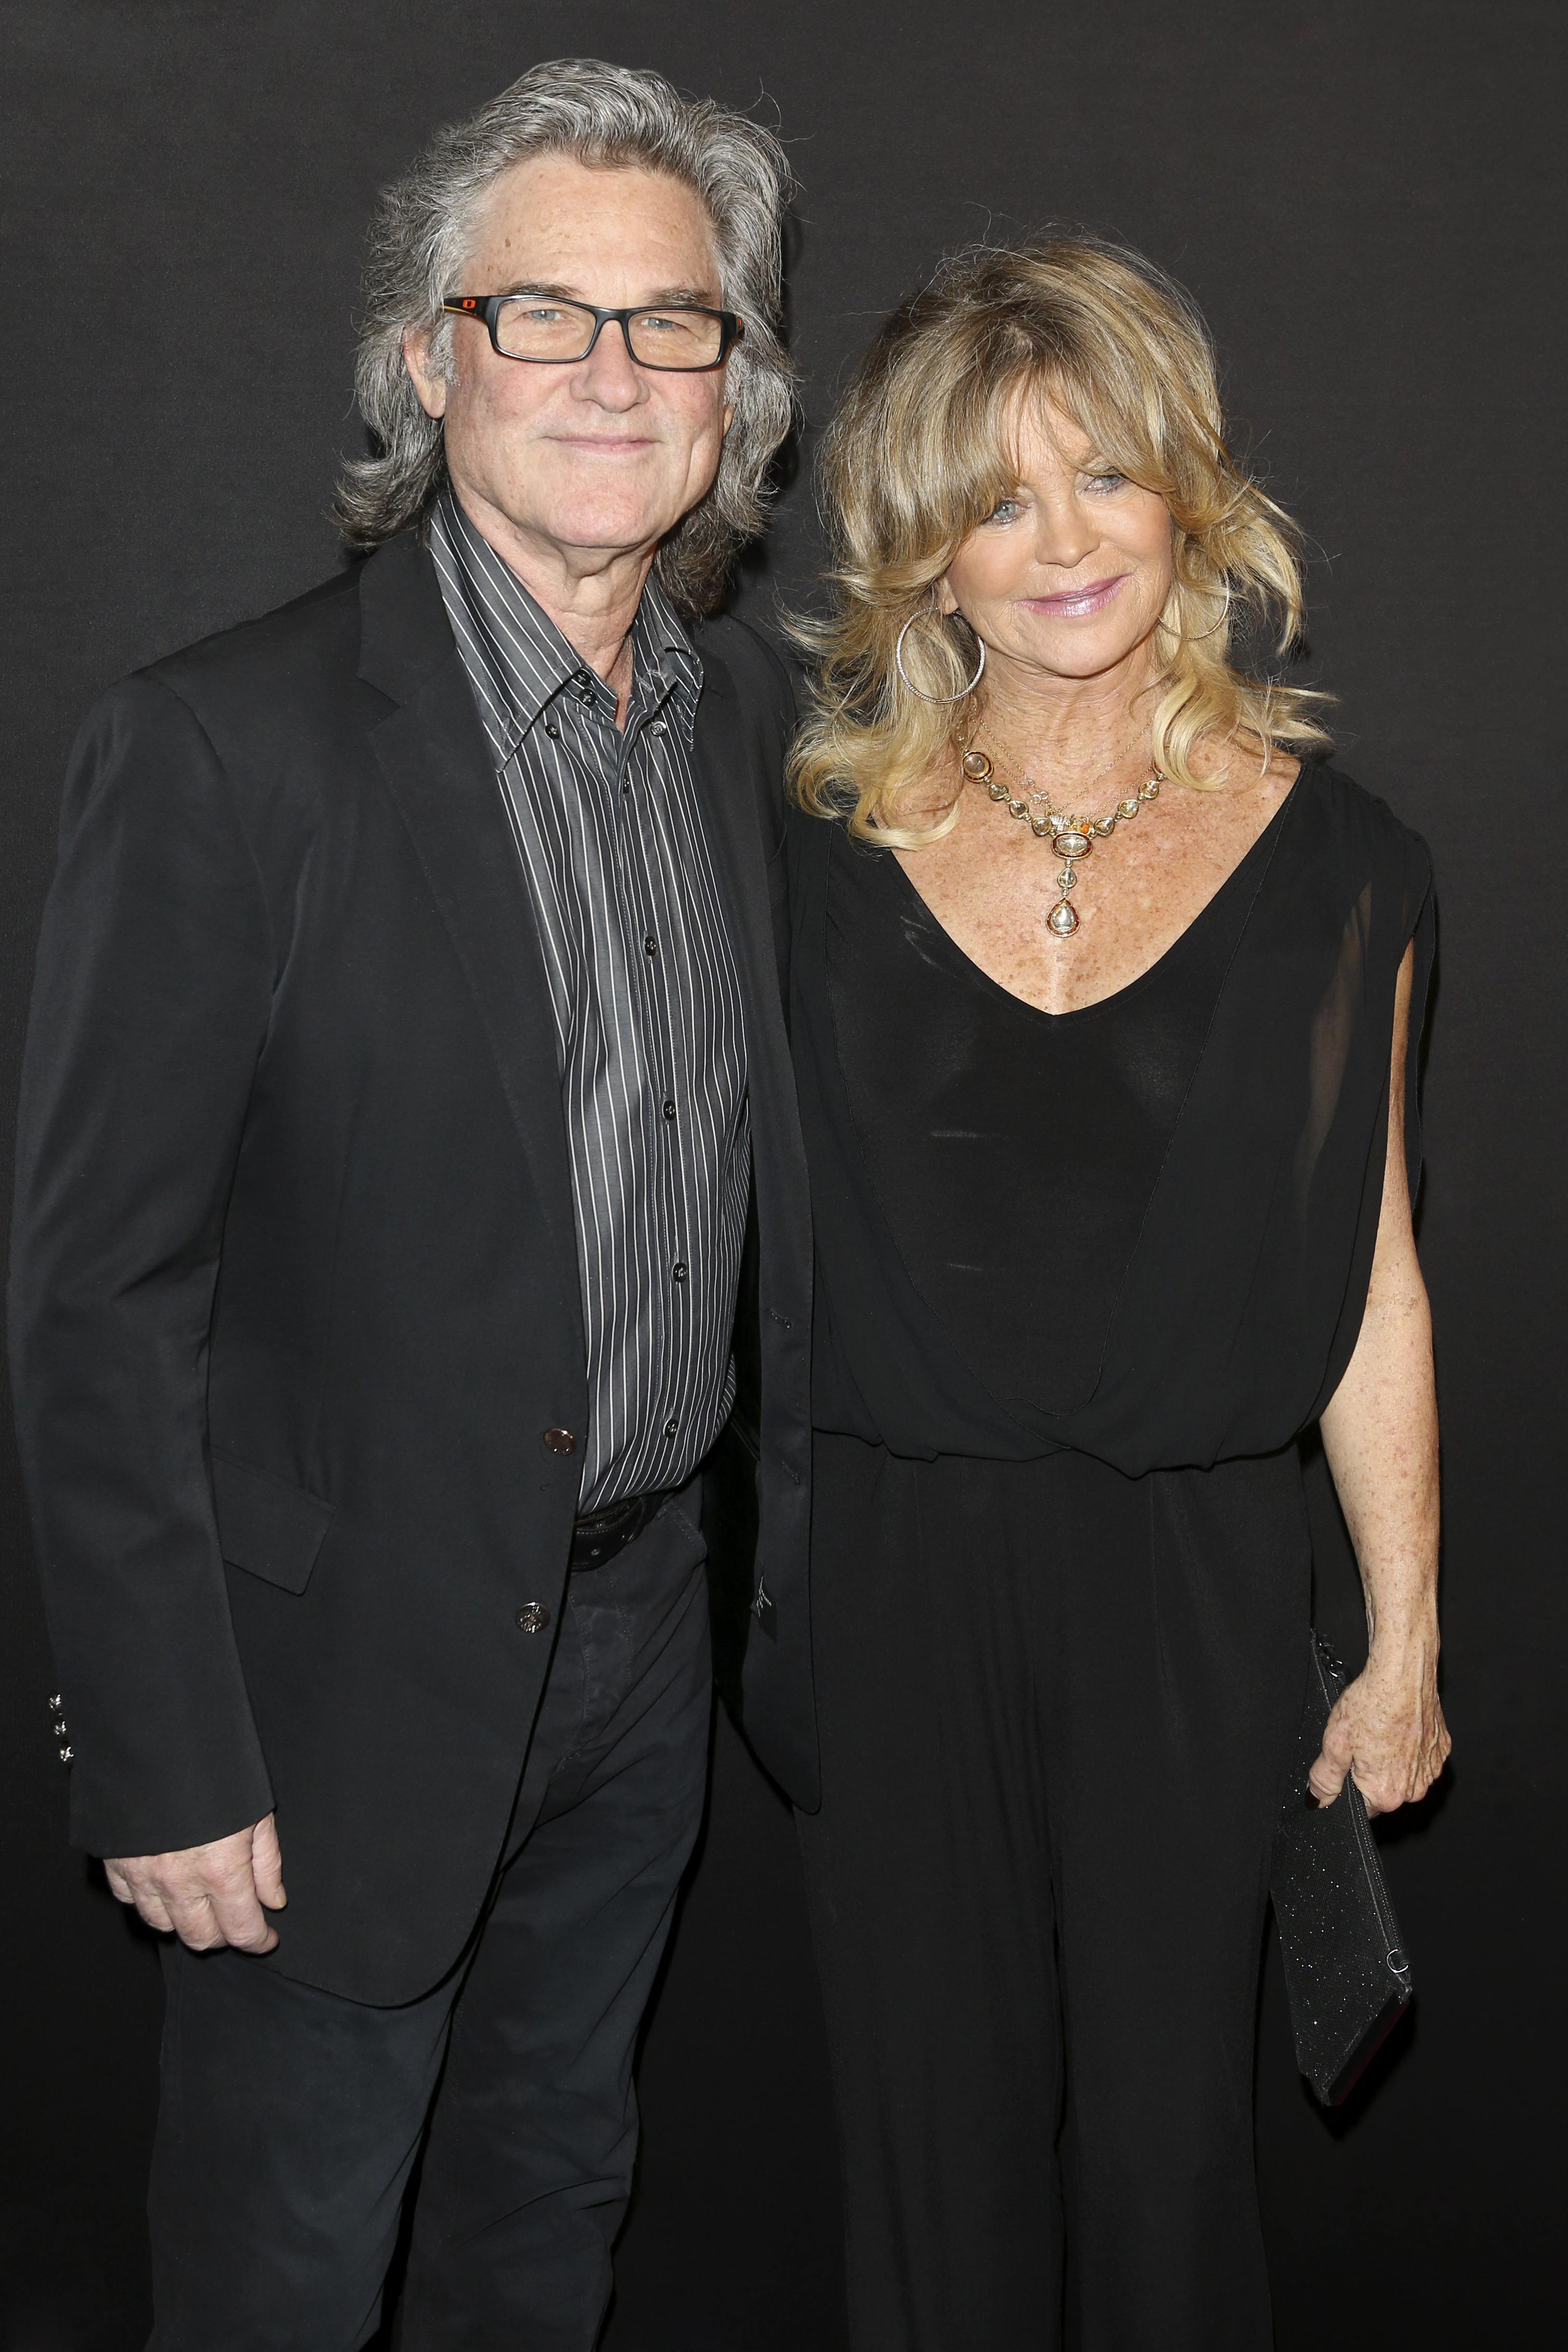 Kurt Russell and Goldie Hawn at the Women's Cancer Research Fund's 'An Unforgettable Evening' in 2019 | Source: Getty Images